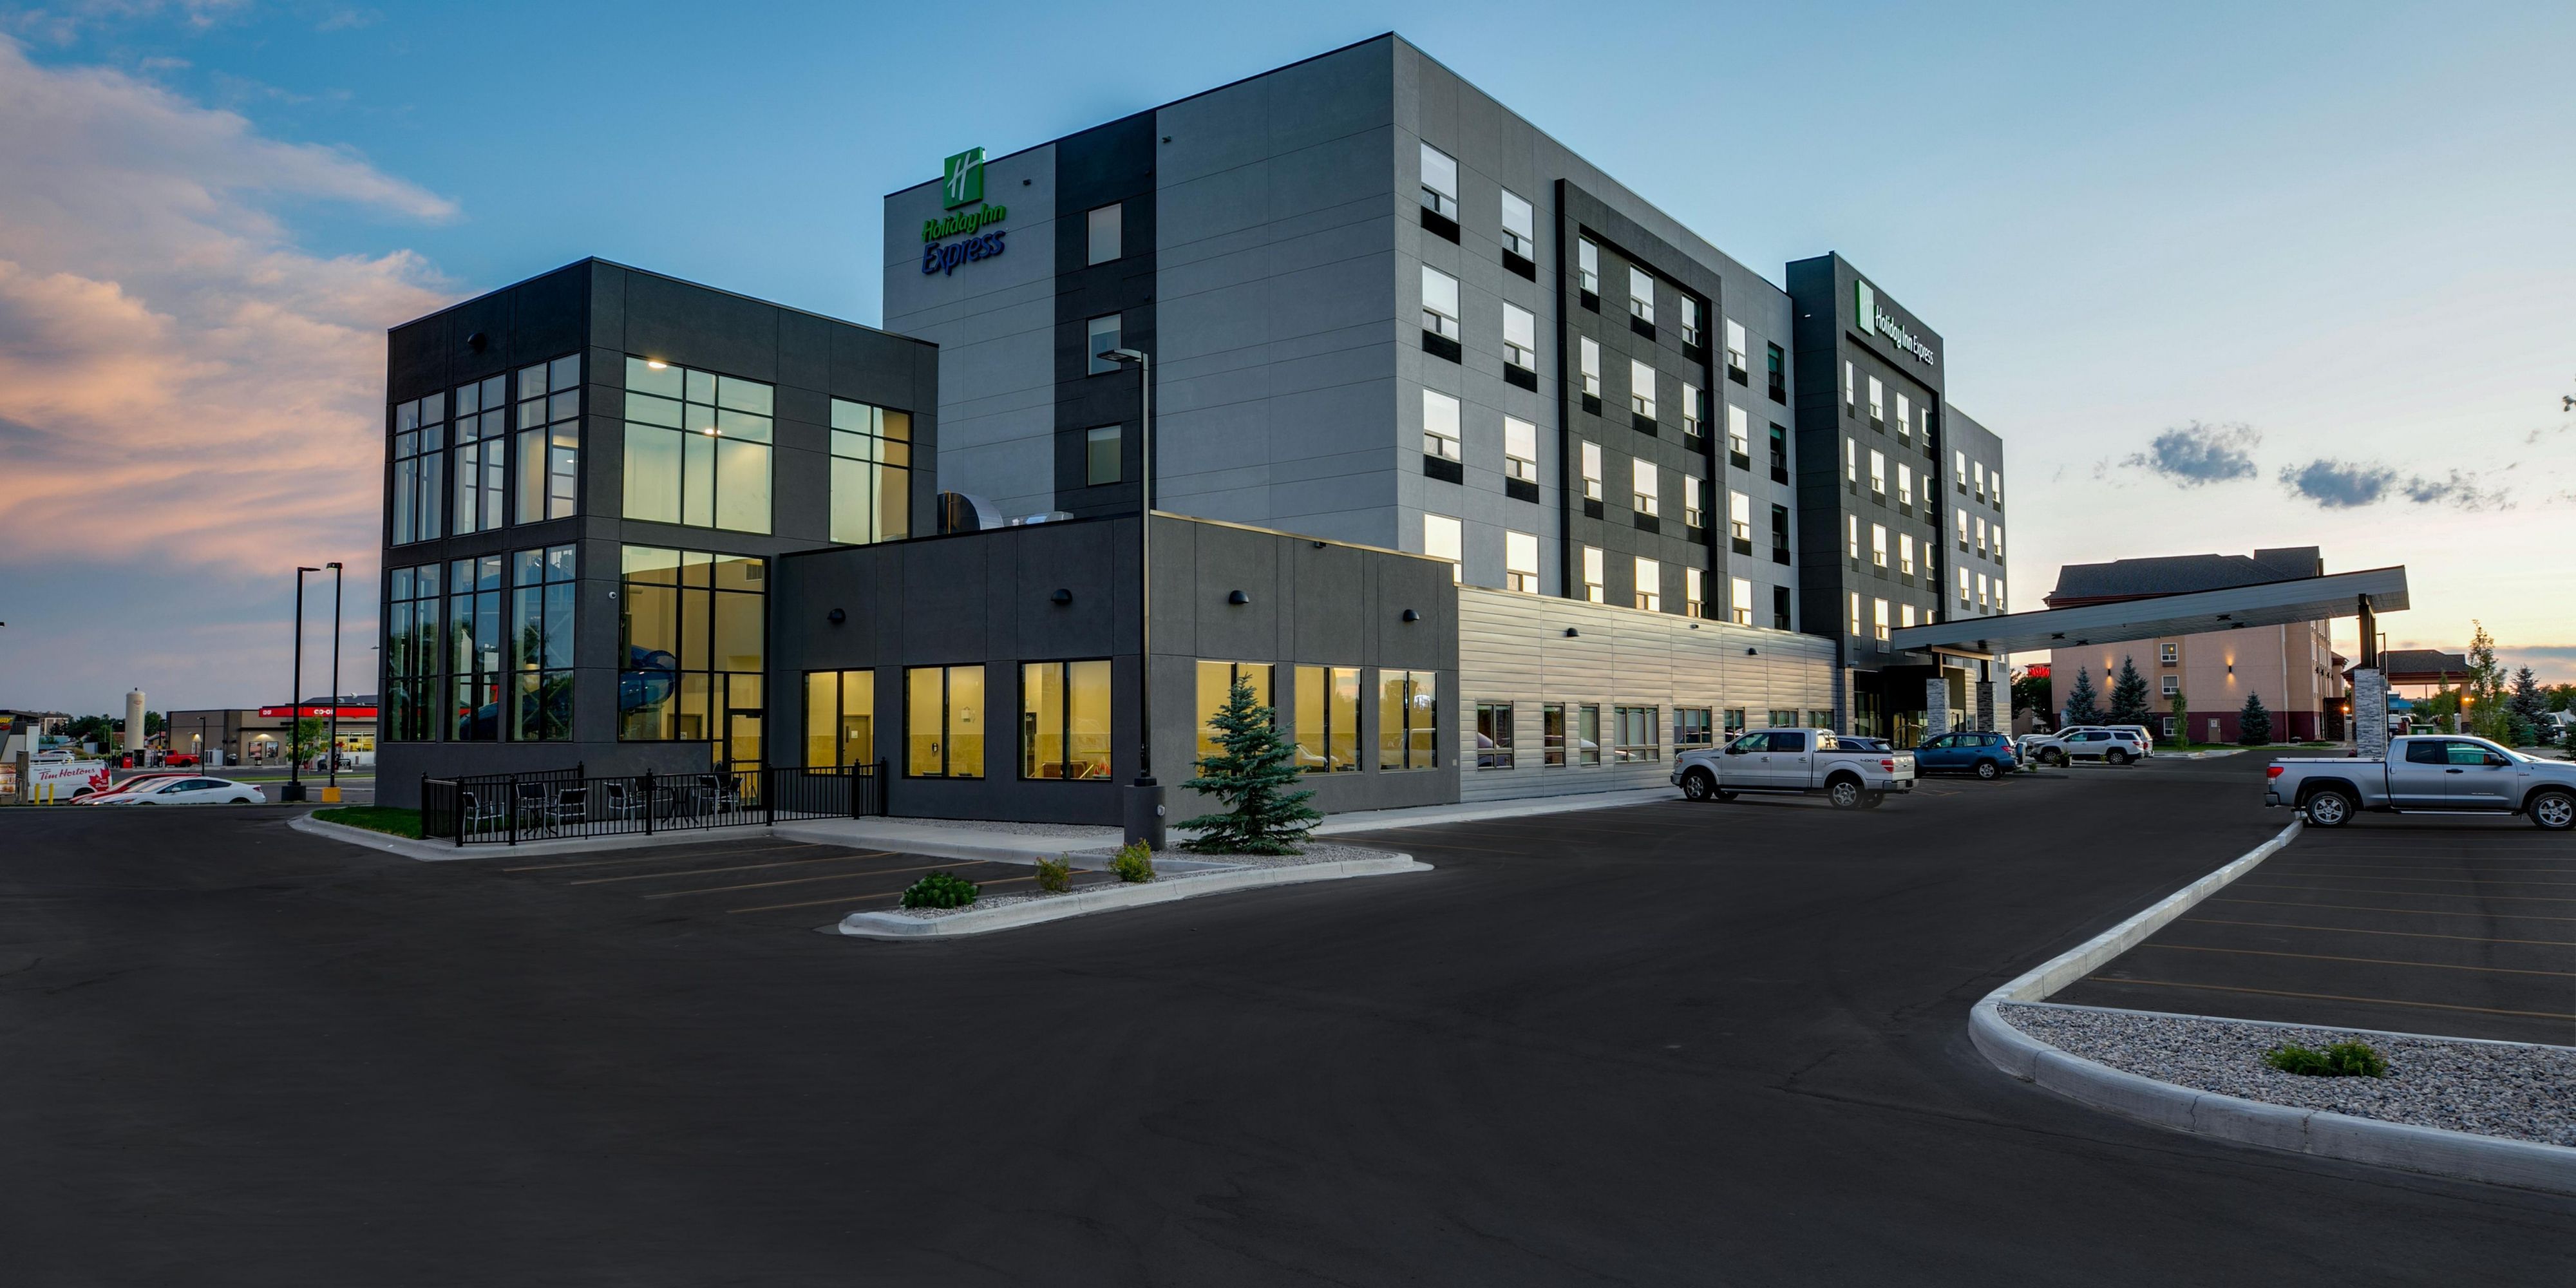 The Holiday Inn Express parking lot includes dedicated truck parking and plug ins at various locations around the lot.  For more information please contact the hotel directly.